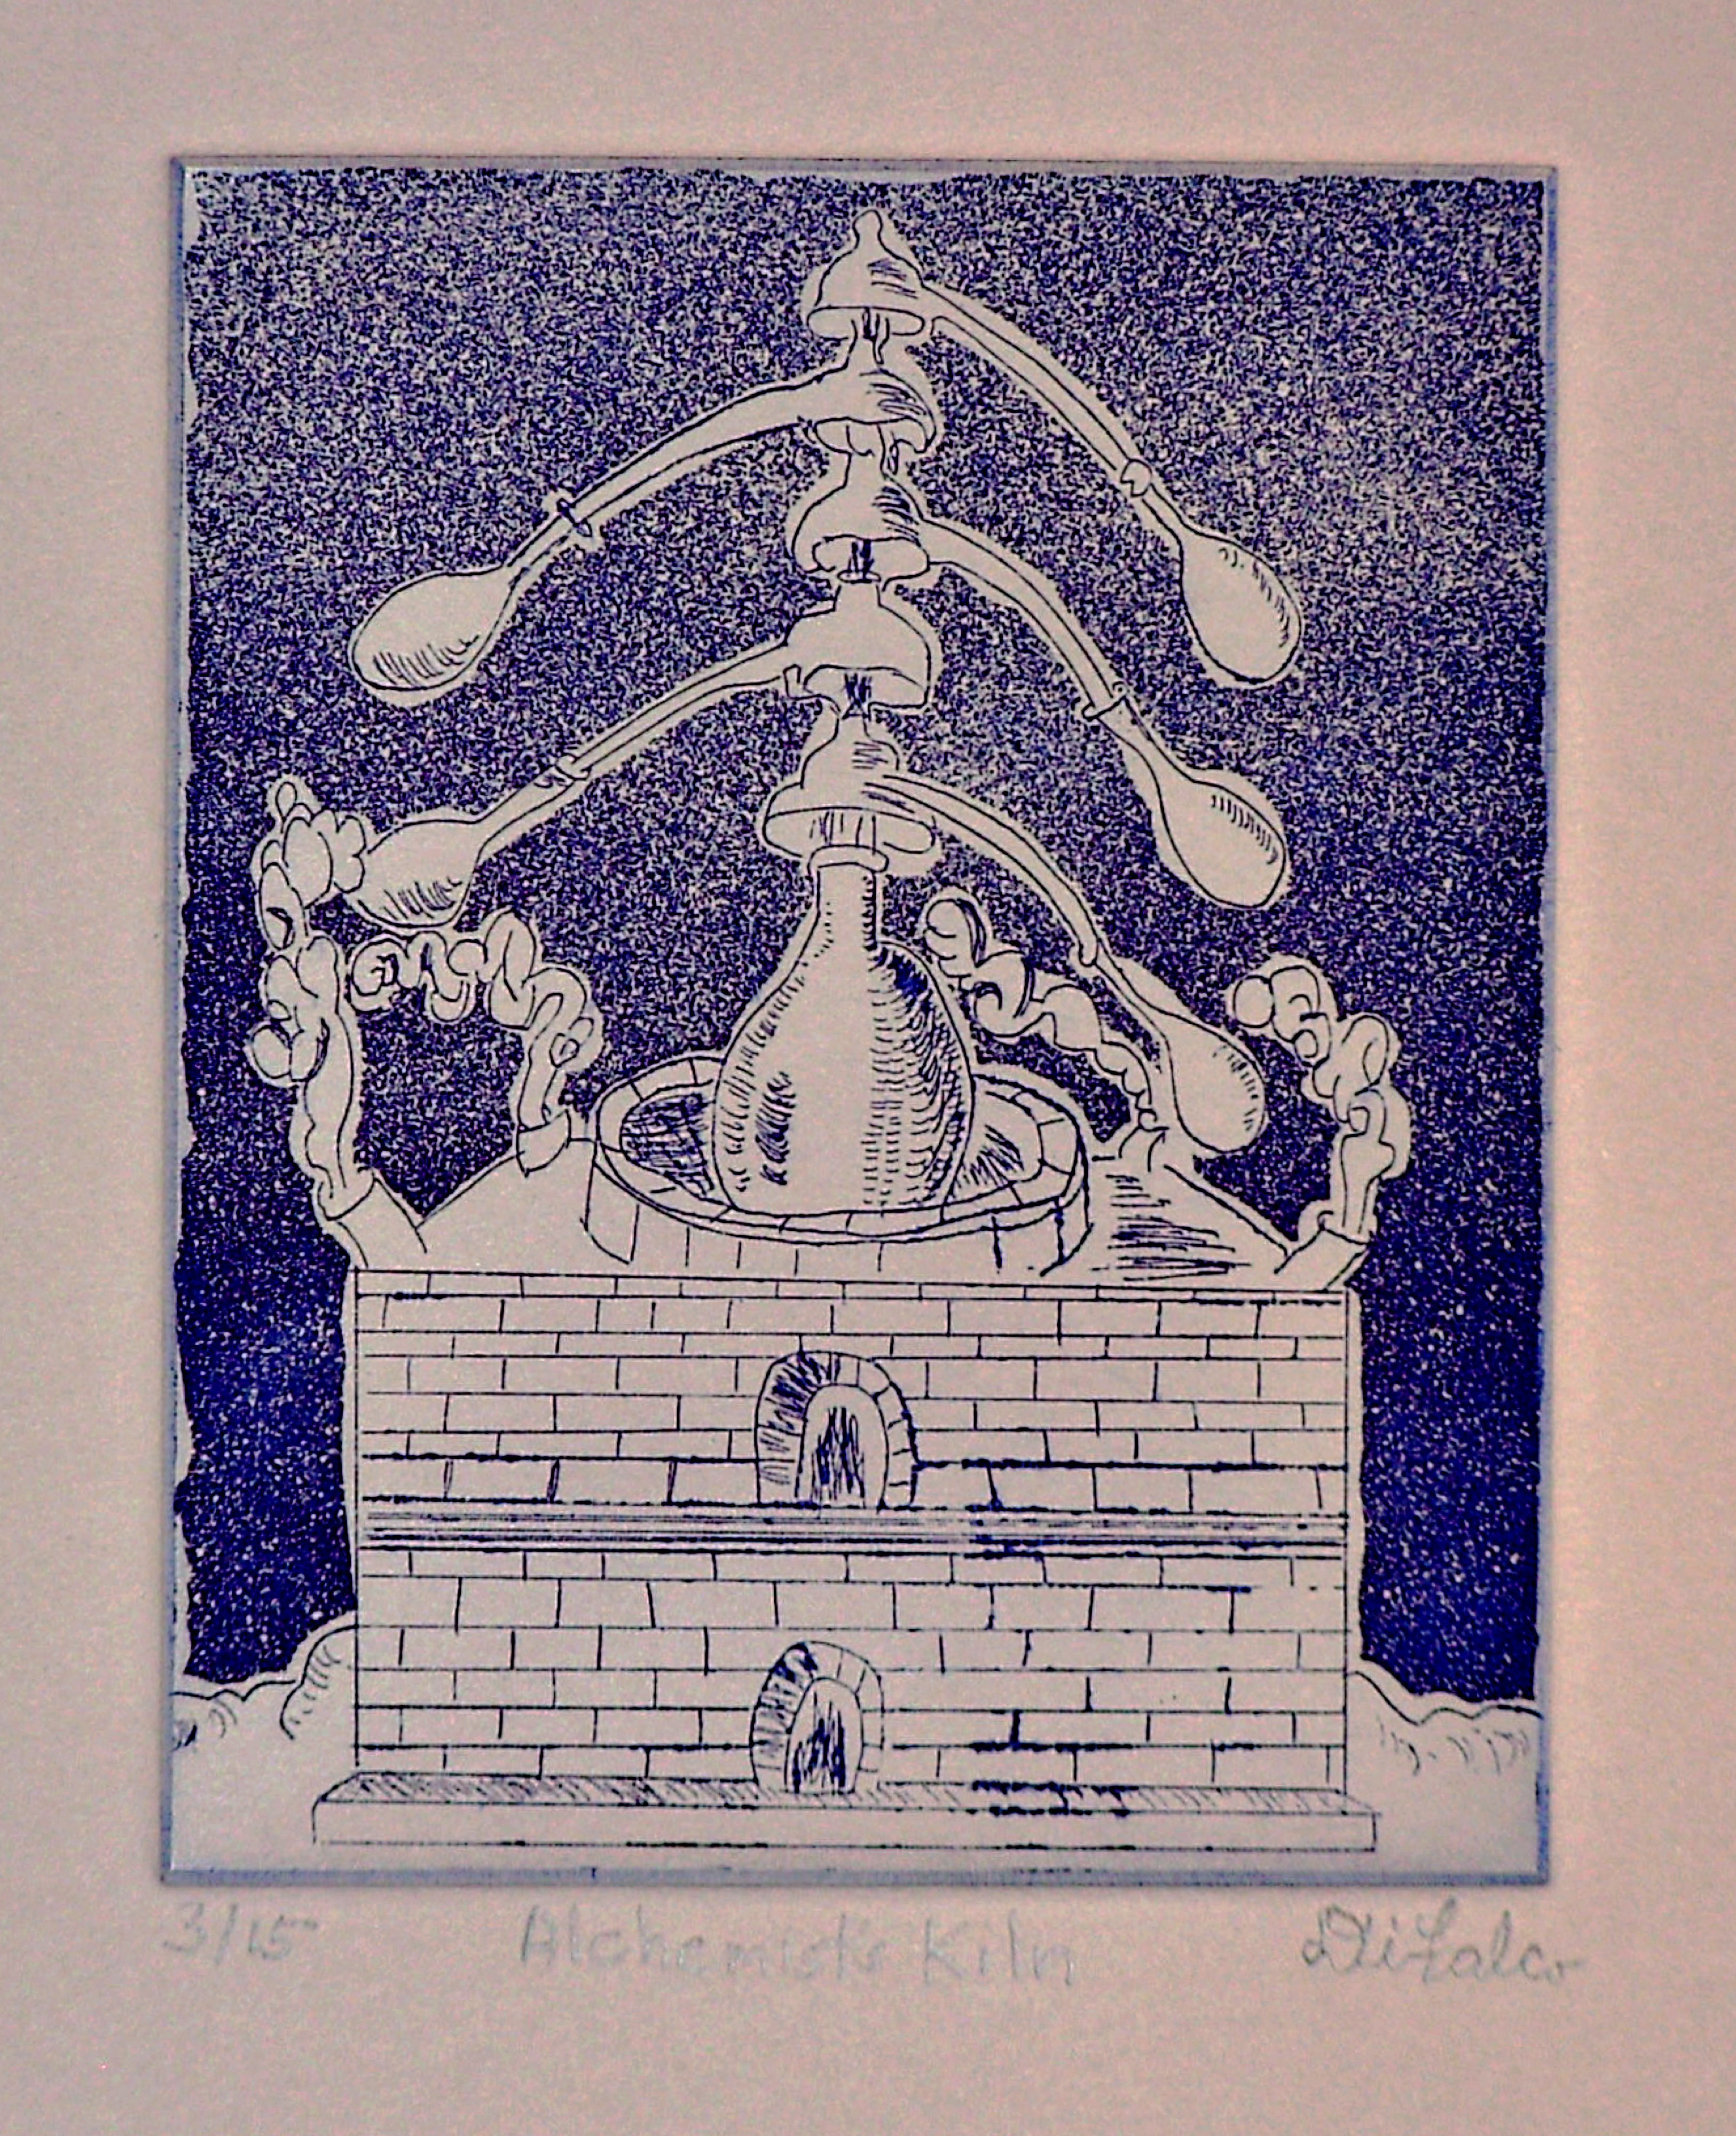 Jerry  Di Falco: 'Kiln of the Alchemist', 2010 Intaglio, Kabbalah. This etching used the studio techniques of intaglio, dry point, and aquatint. It is executed using a hand blended color of oil base etching inks, all Charbonnel brand from Paris, on Italian mould made grey paper called Magnani Pescia, which is from the town of Cartiera Magnani where the same ...